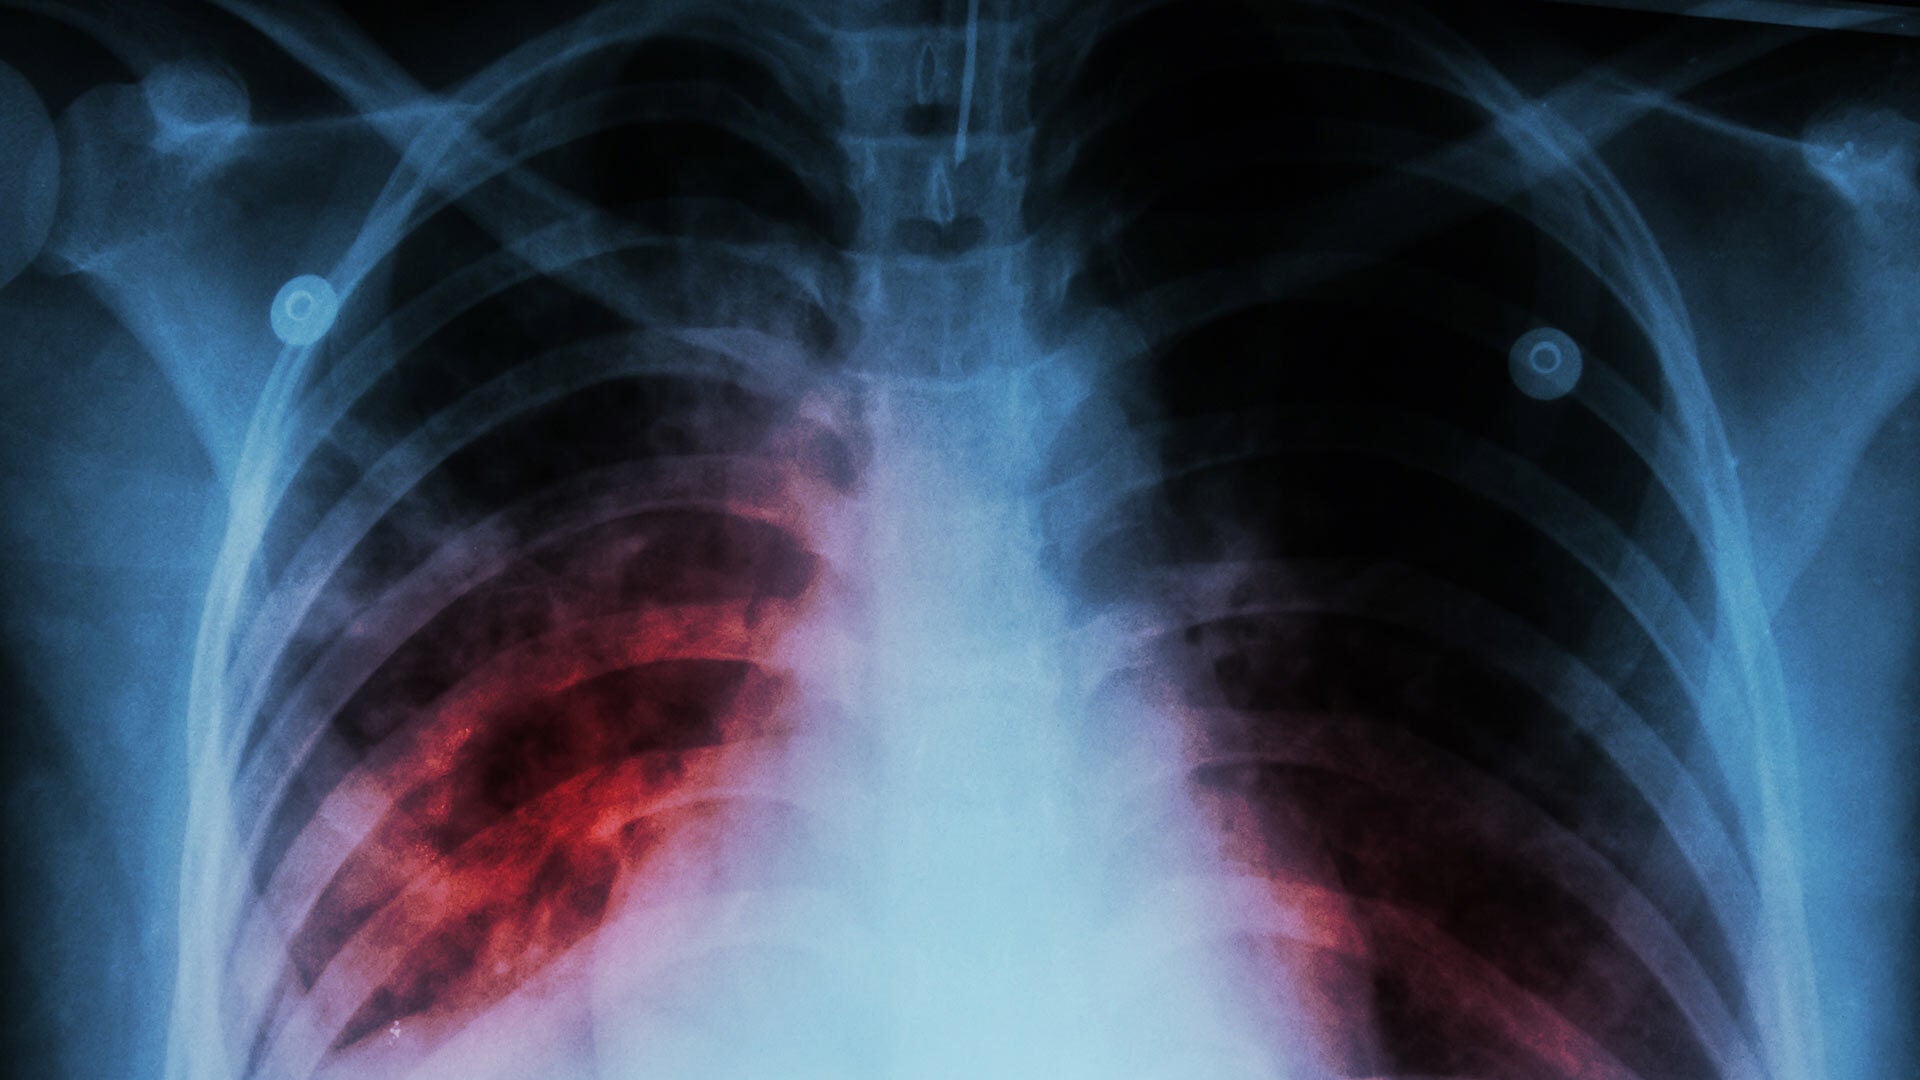 chest x-ray of human lungs with pulmonary tuberculosis